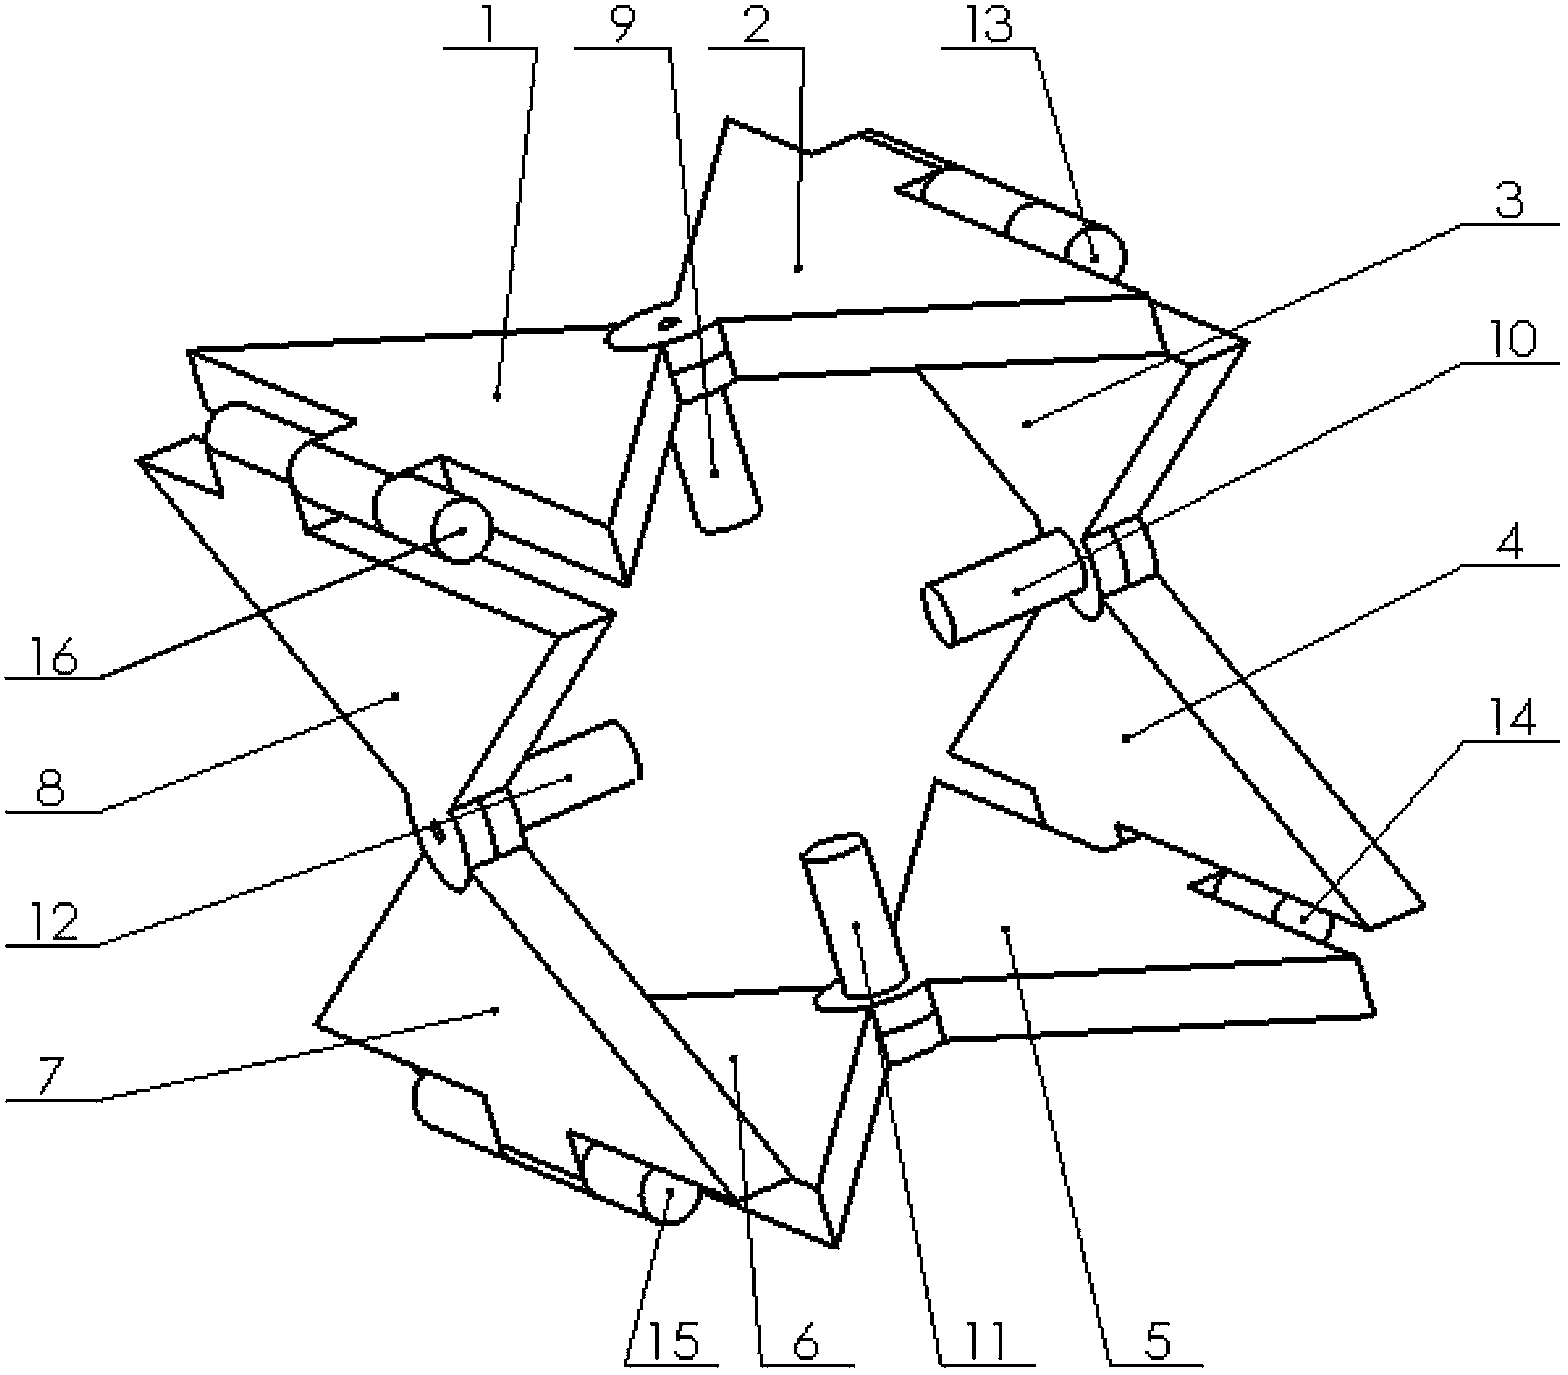 Quadrilateral rolling mechanism capable of steering